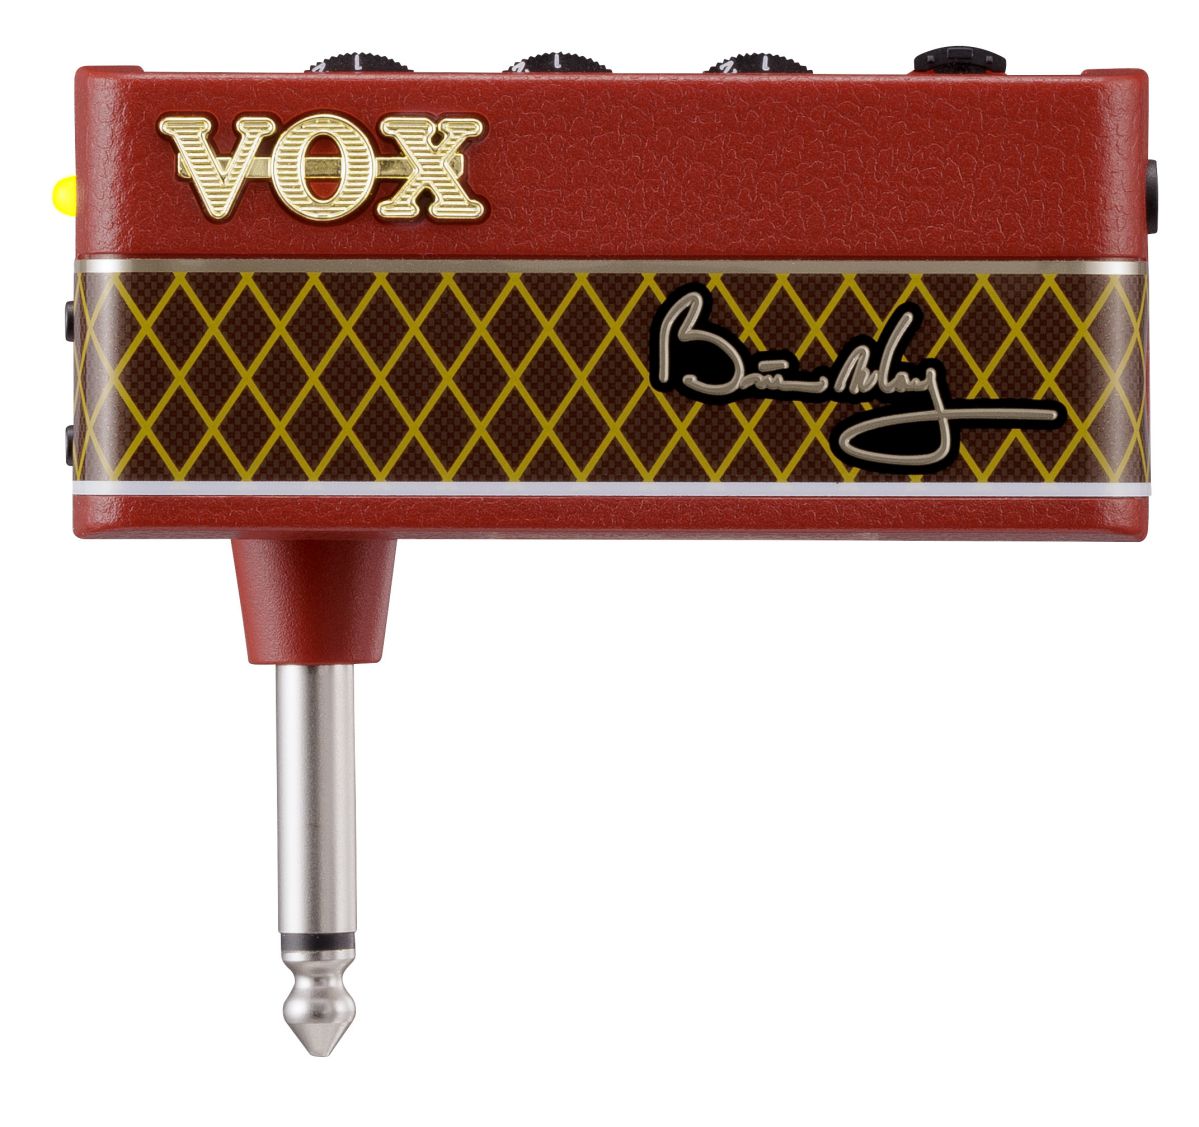 An image of Vox AmPlug Brian May Guitar Headphone Amplifier - Gift for a Guitarist | PMT Onl...